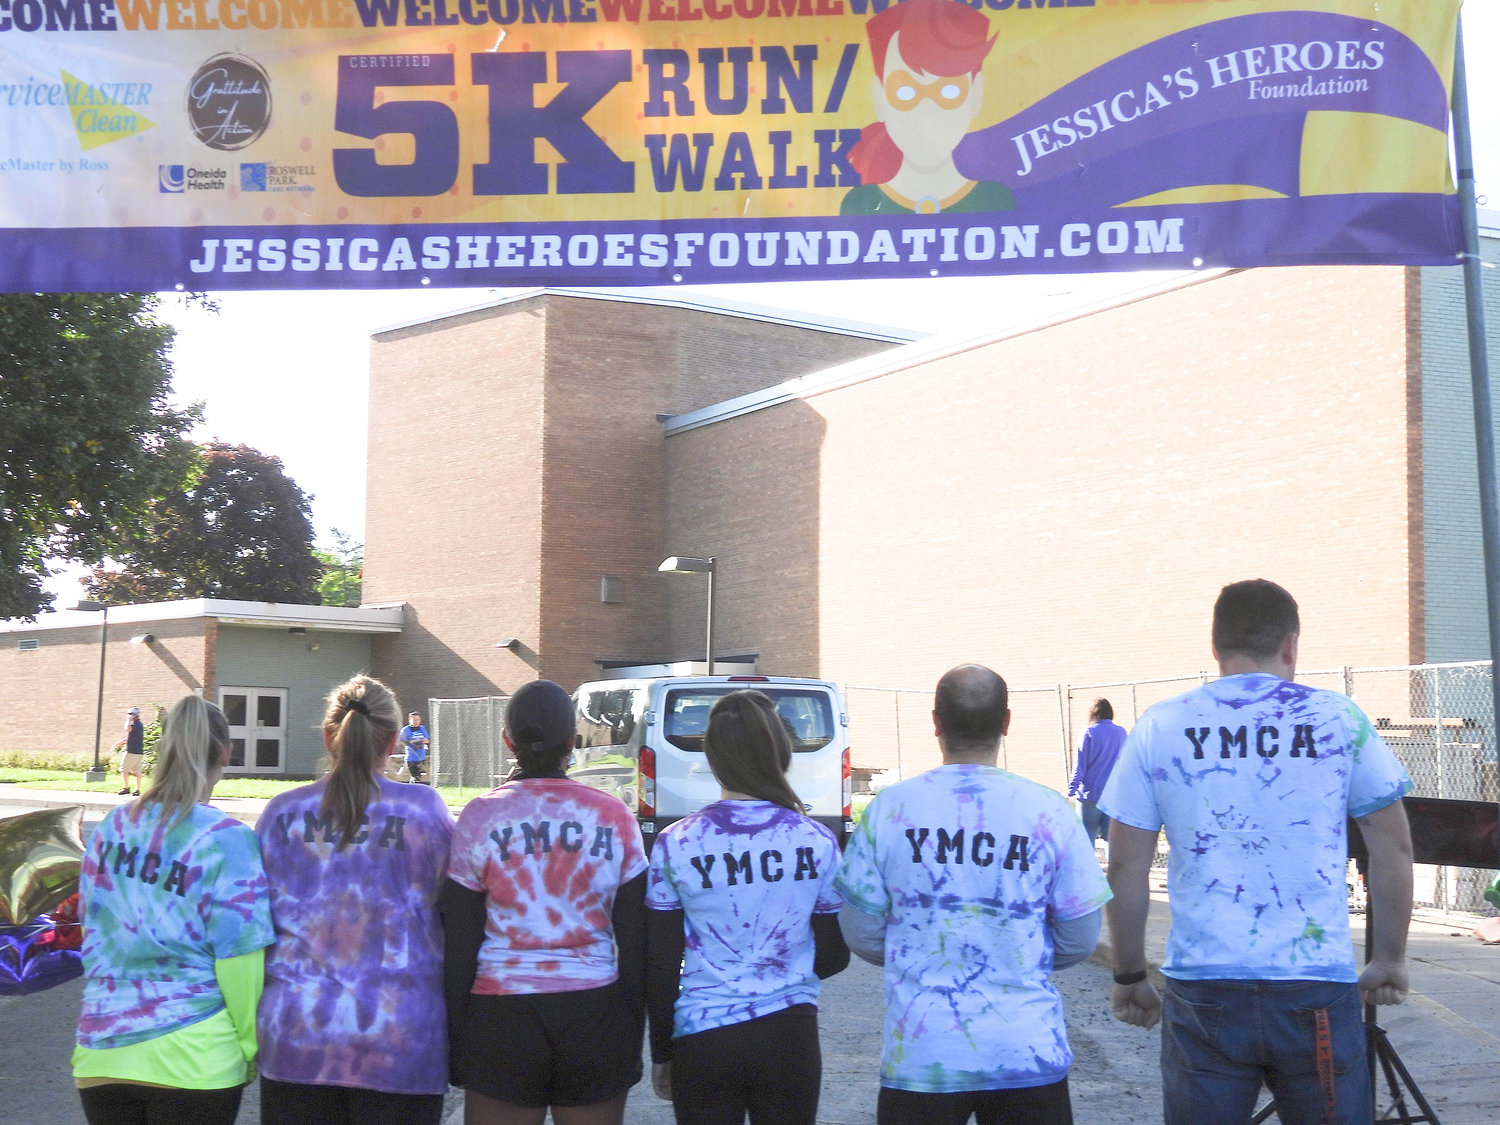 The local YMCA joined participated in the Jessica's Heroes 5K Run and Walk on Saturday, Sept. 24 at Oneida High School.